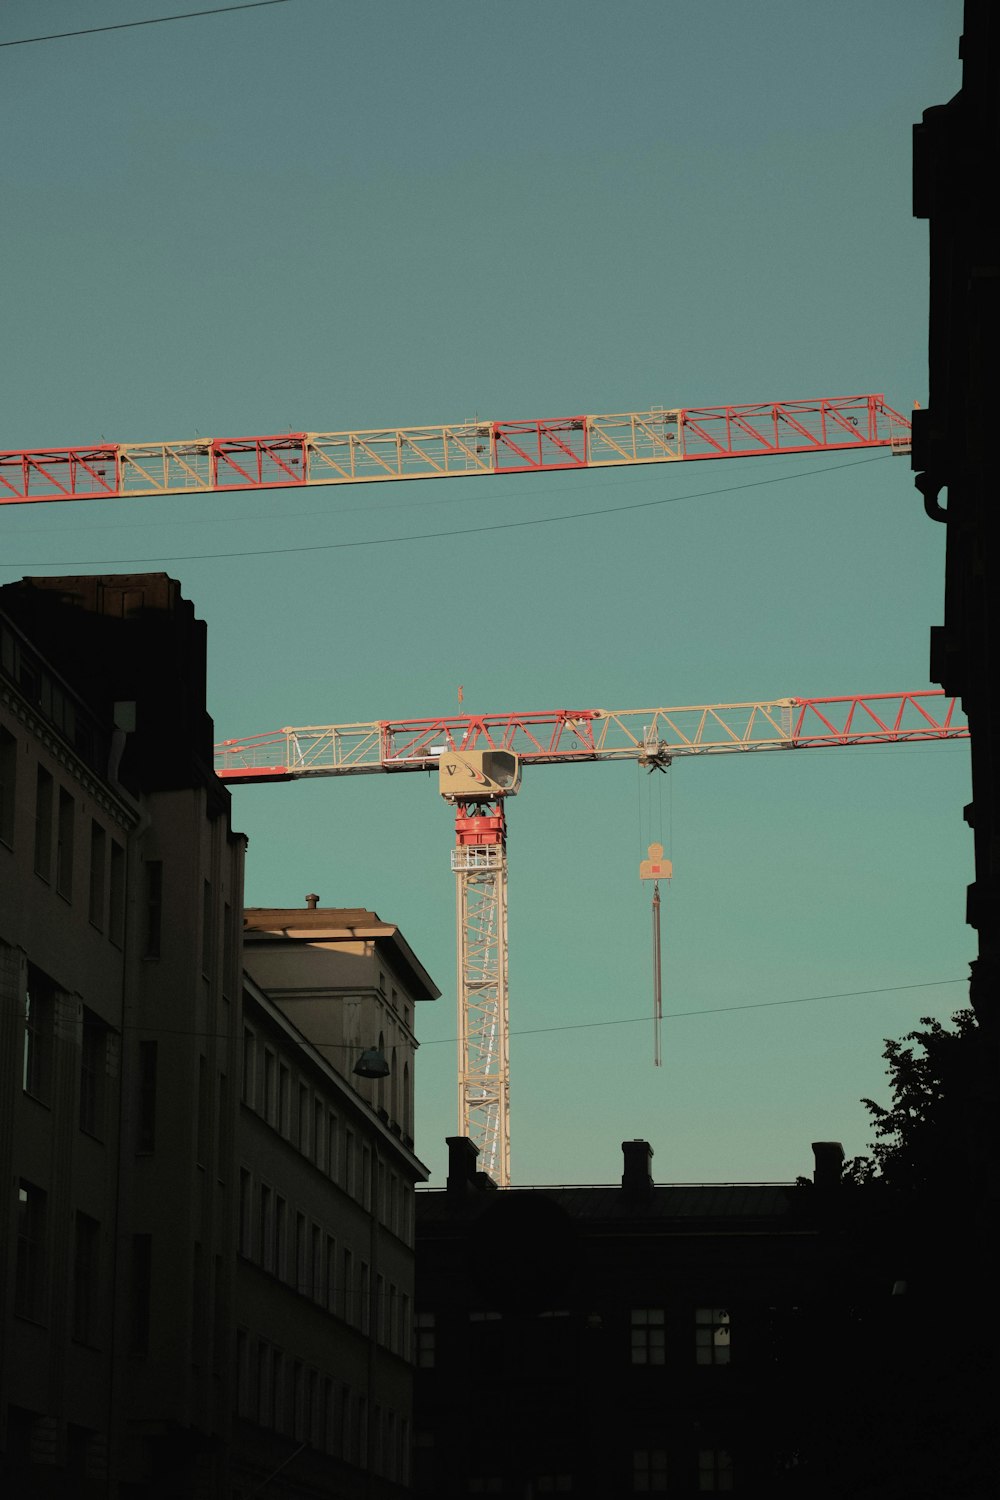 a large crane over buildings